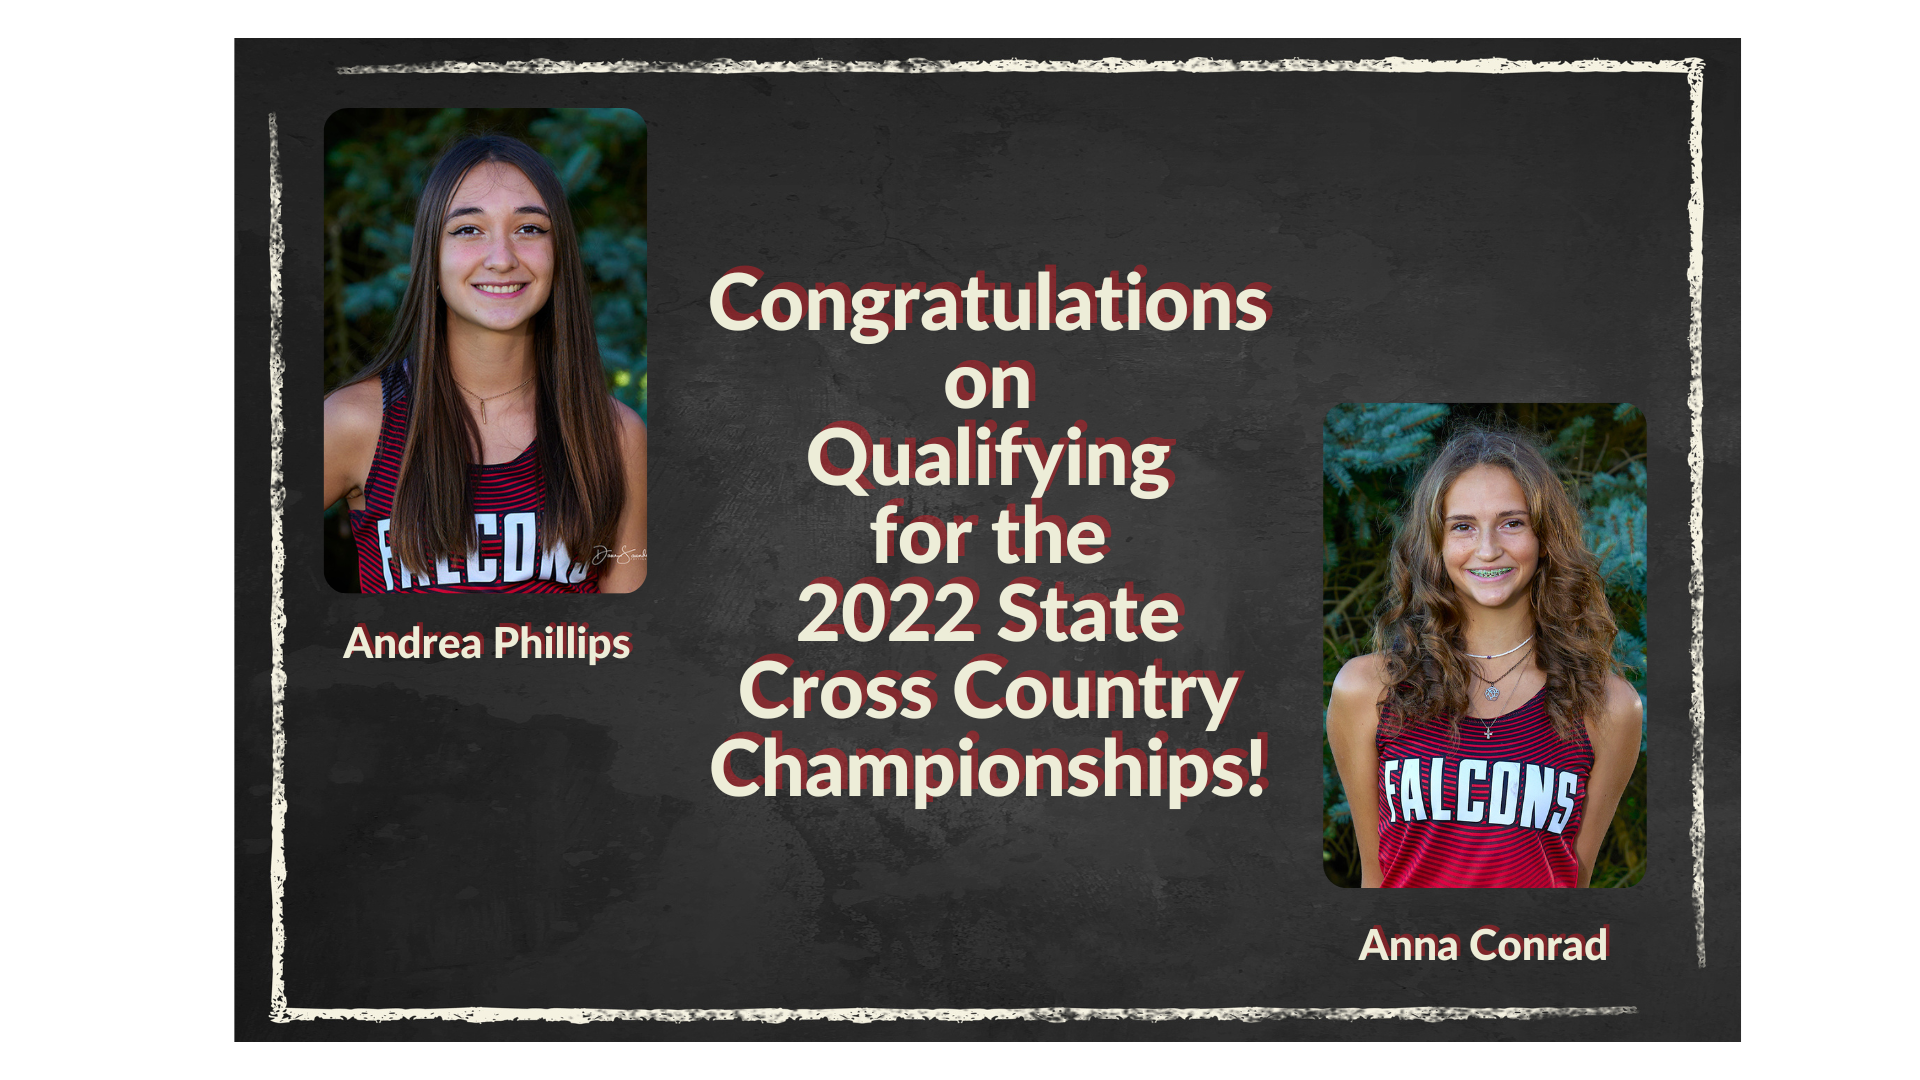 Congratulations Anna Conrad and Andrea Phillips on qualifying for State